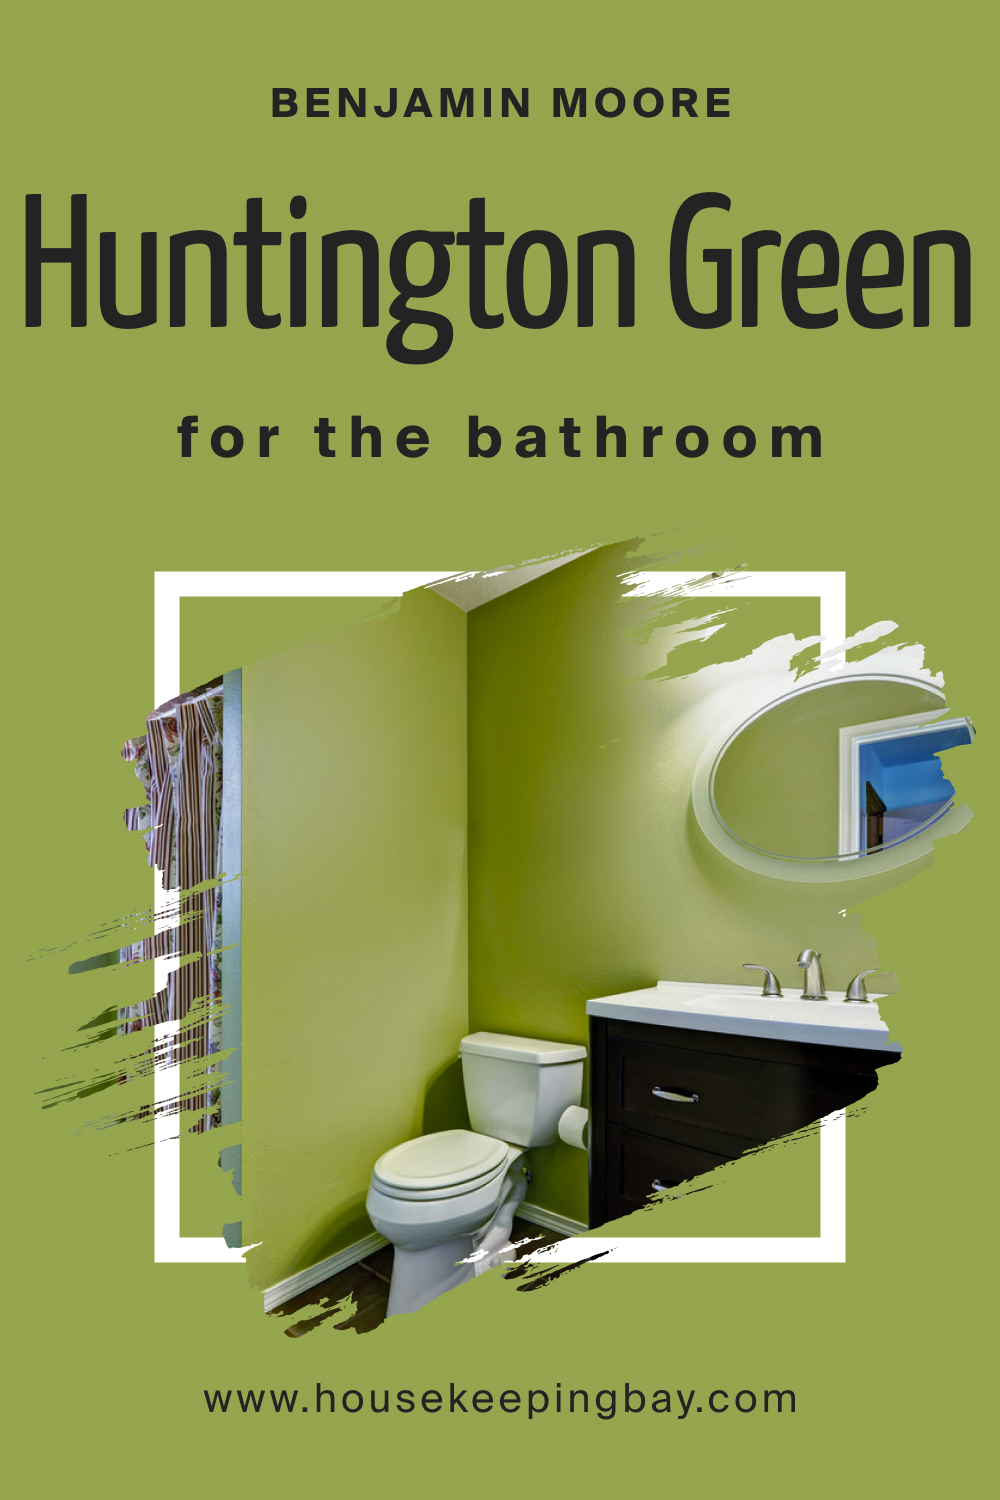 How to Use Huntington Green 406 in the Bathroom?